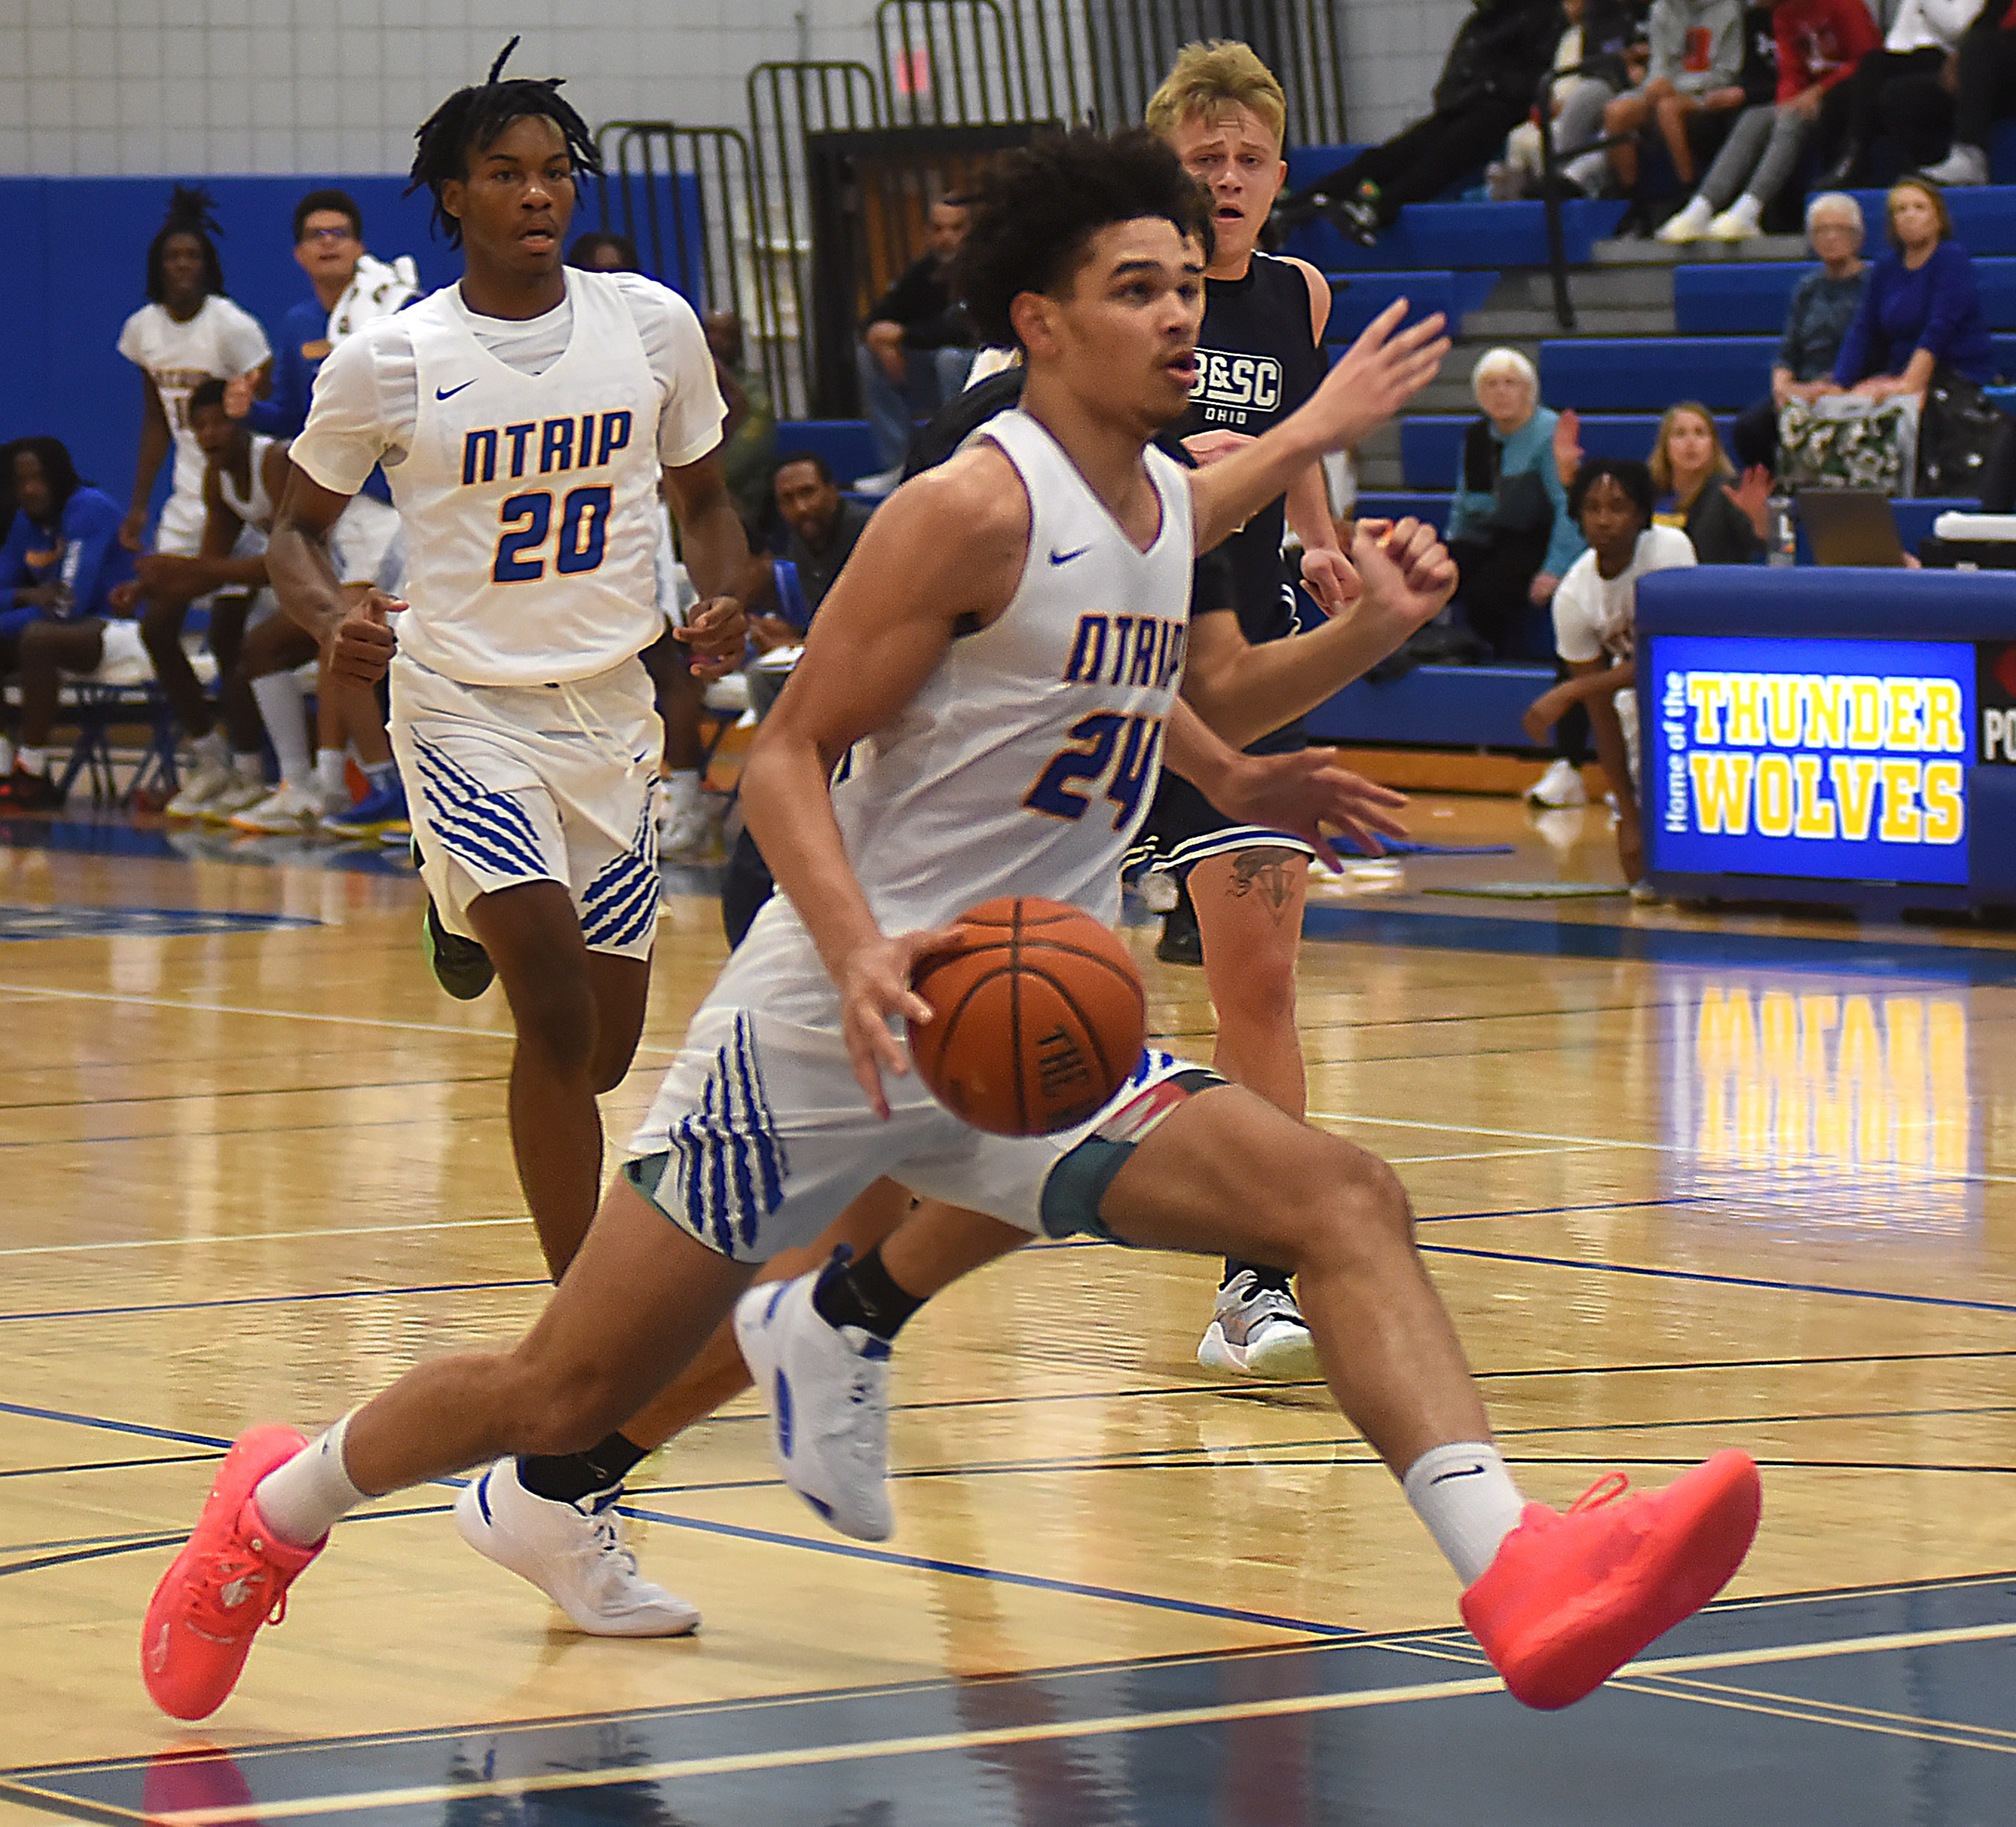 NCCC clips Harford at ACM Tourney